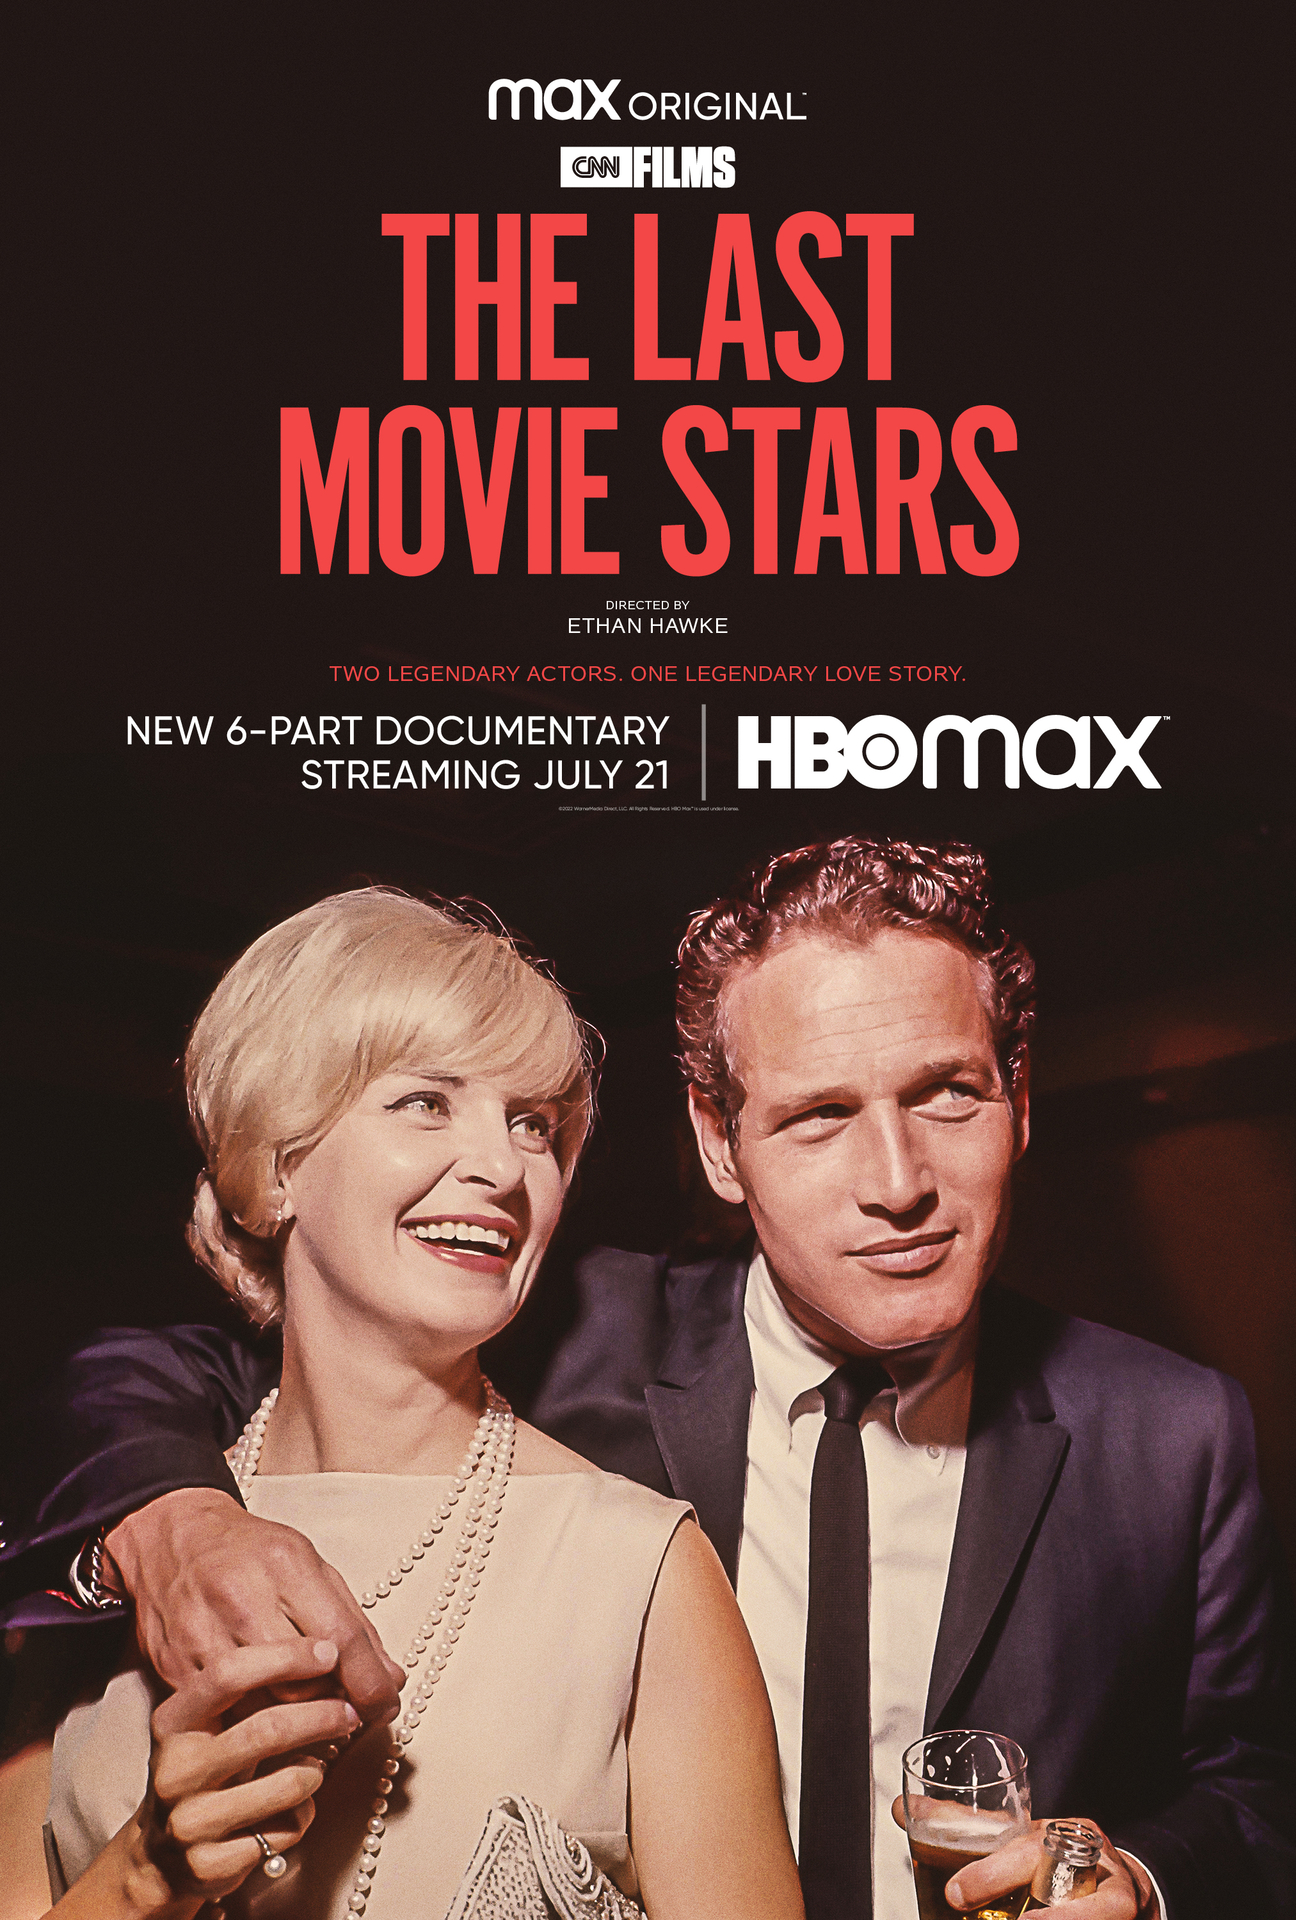 The Cinema Spot talks about the music in Emily Wachtel, Stewart Stern, and Ethan Hawke's HBO Max Original limited documentary series, The Last Movie Stars